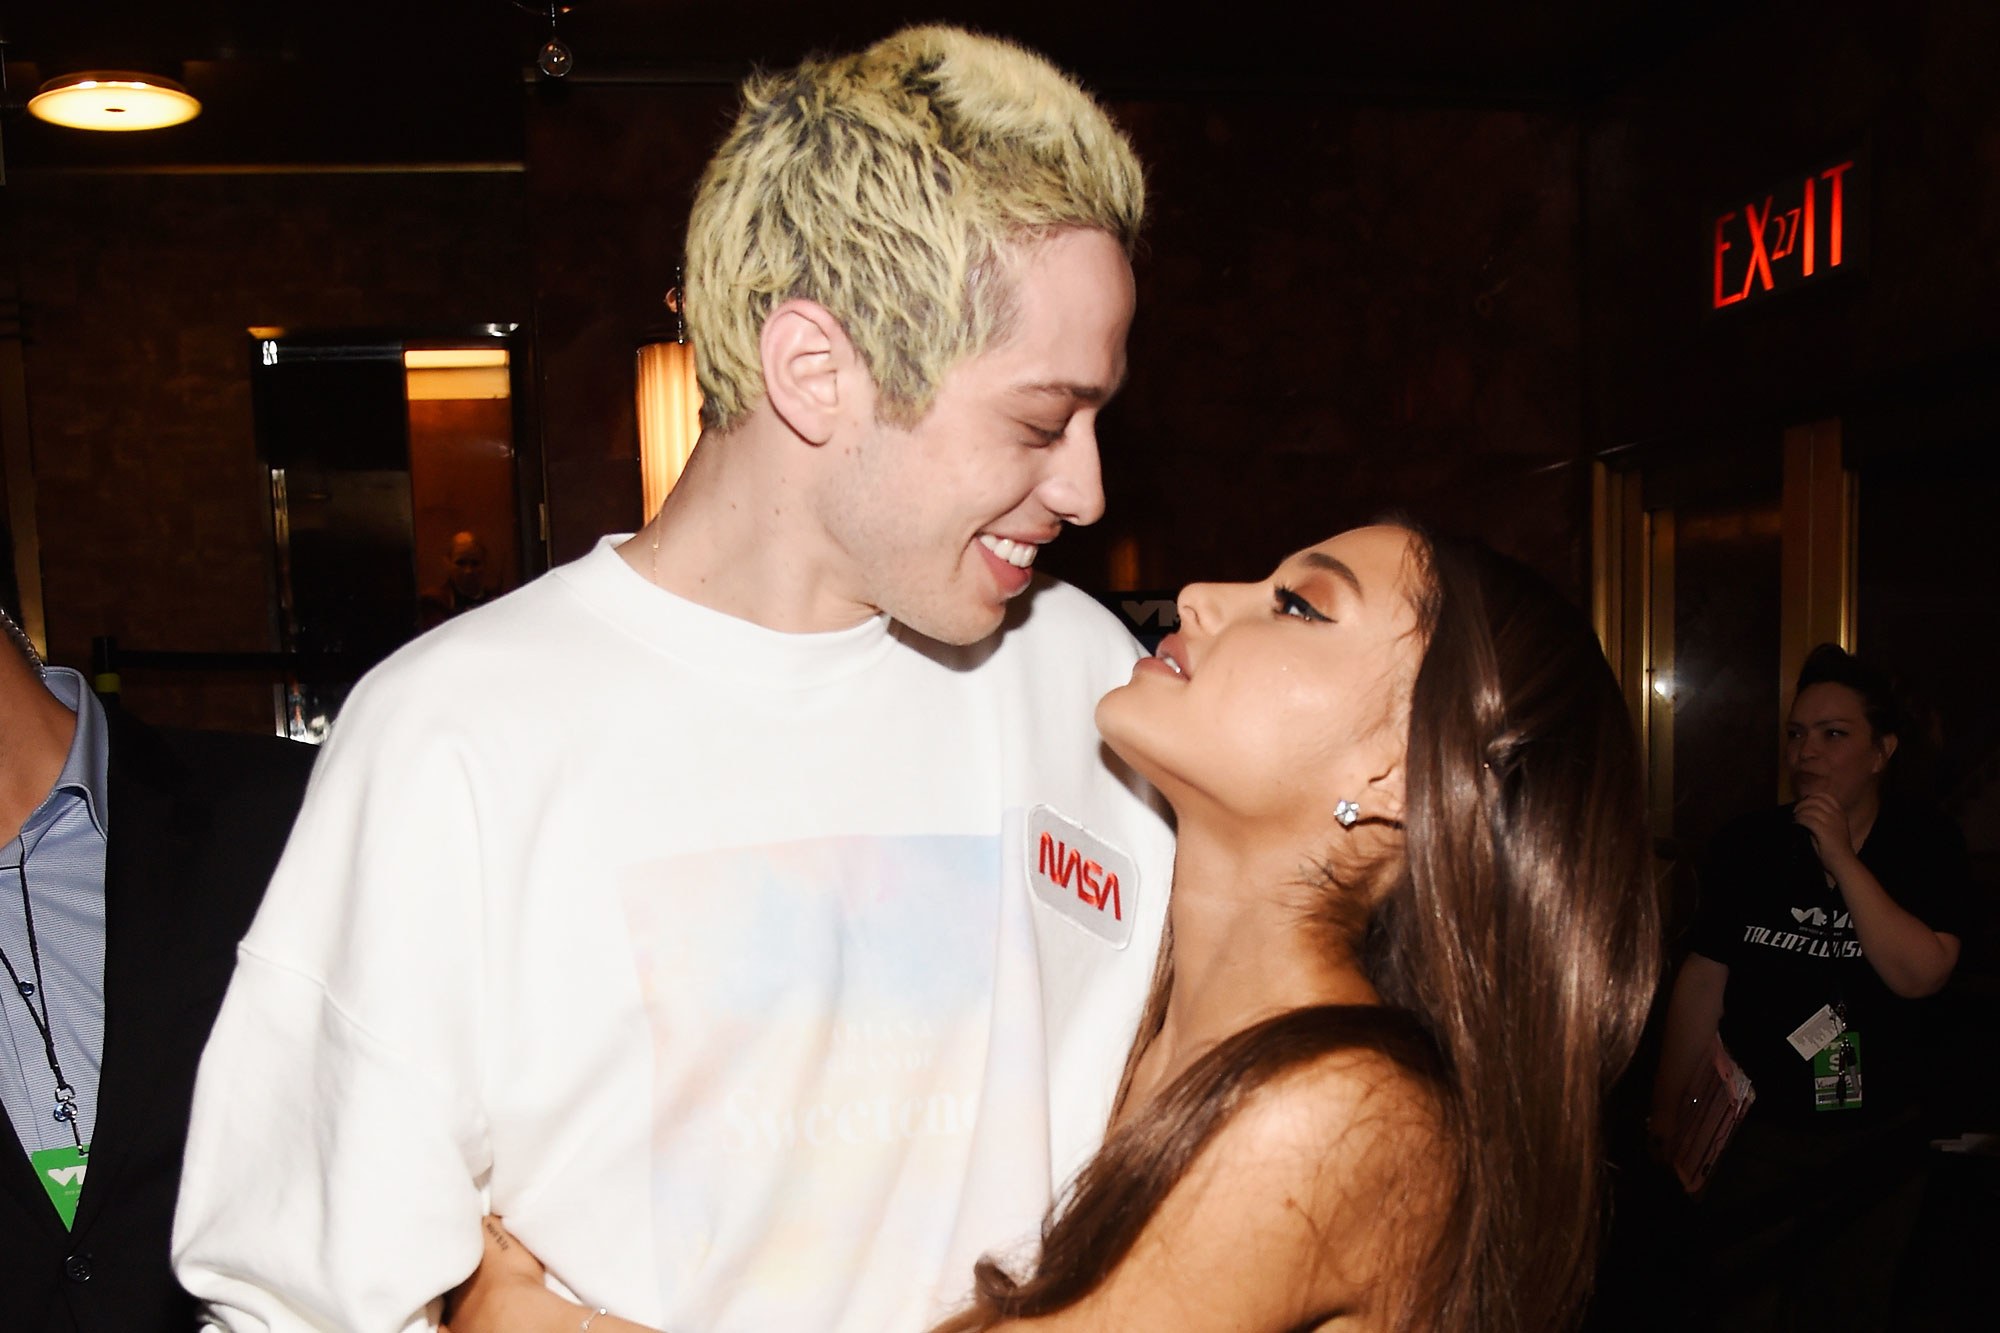 Pete Davidson Exchanged Ariana Grande's contraception pills With Tic Tacs